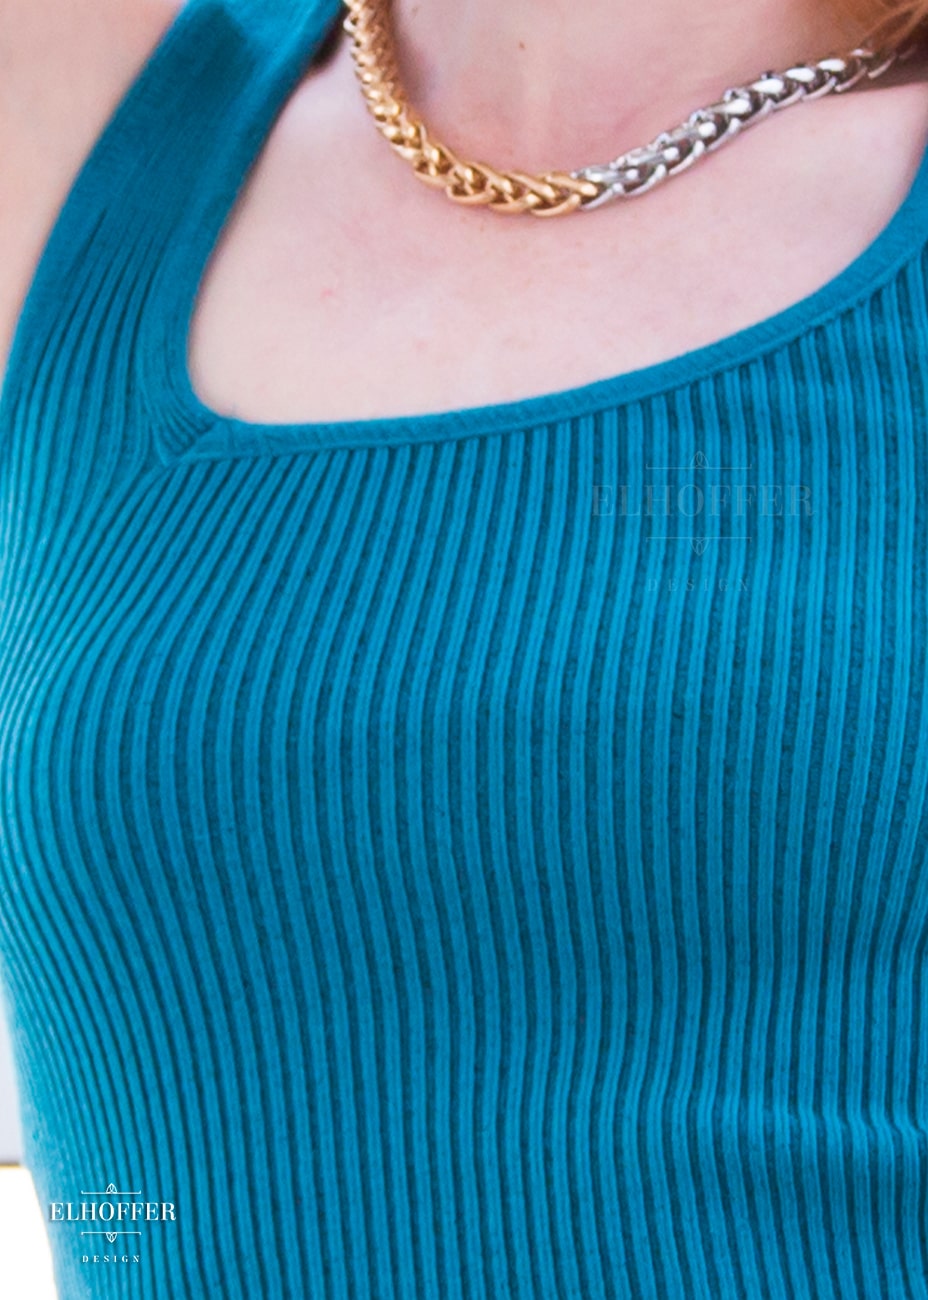 A close up of the rib knit and asymmetrical neckline.